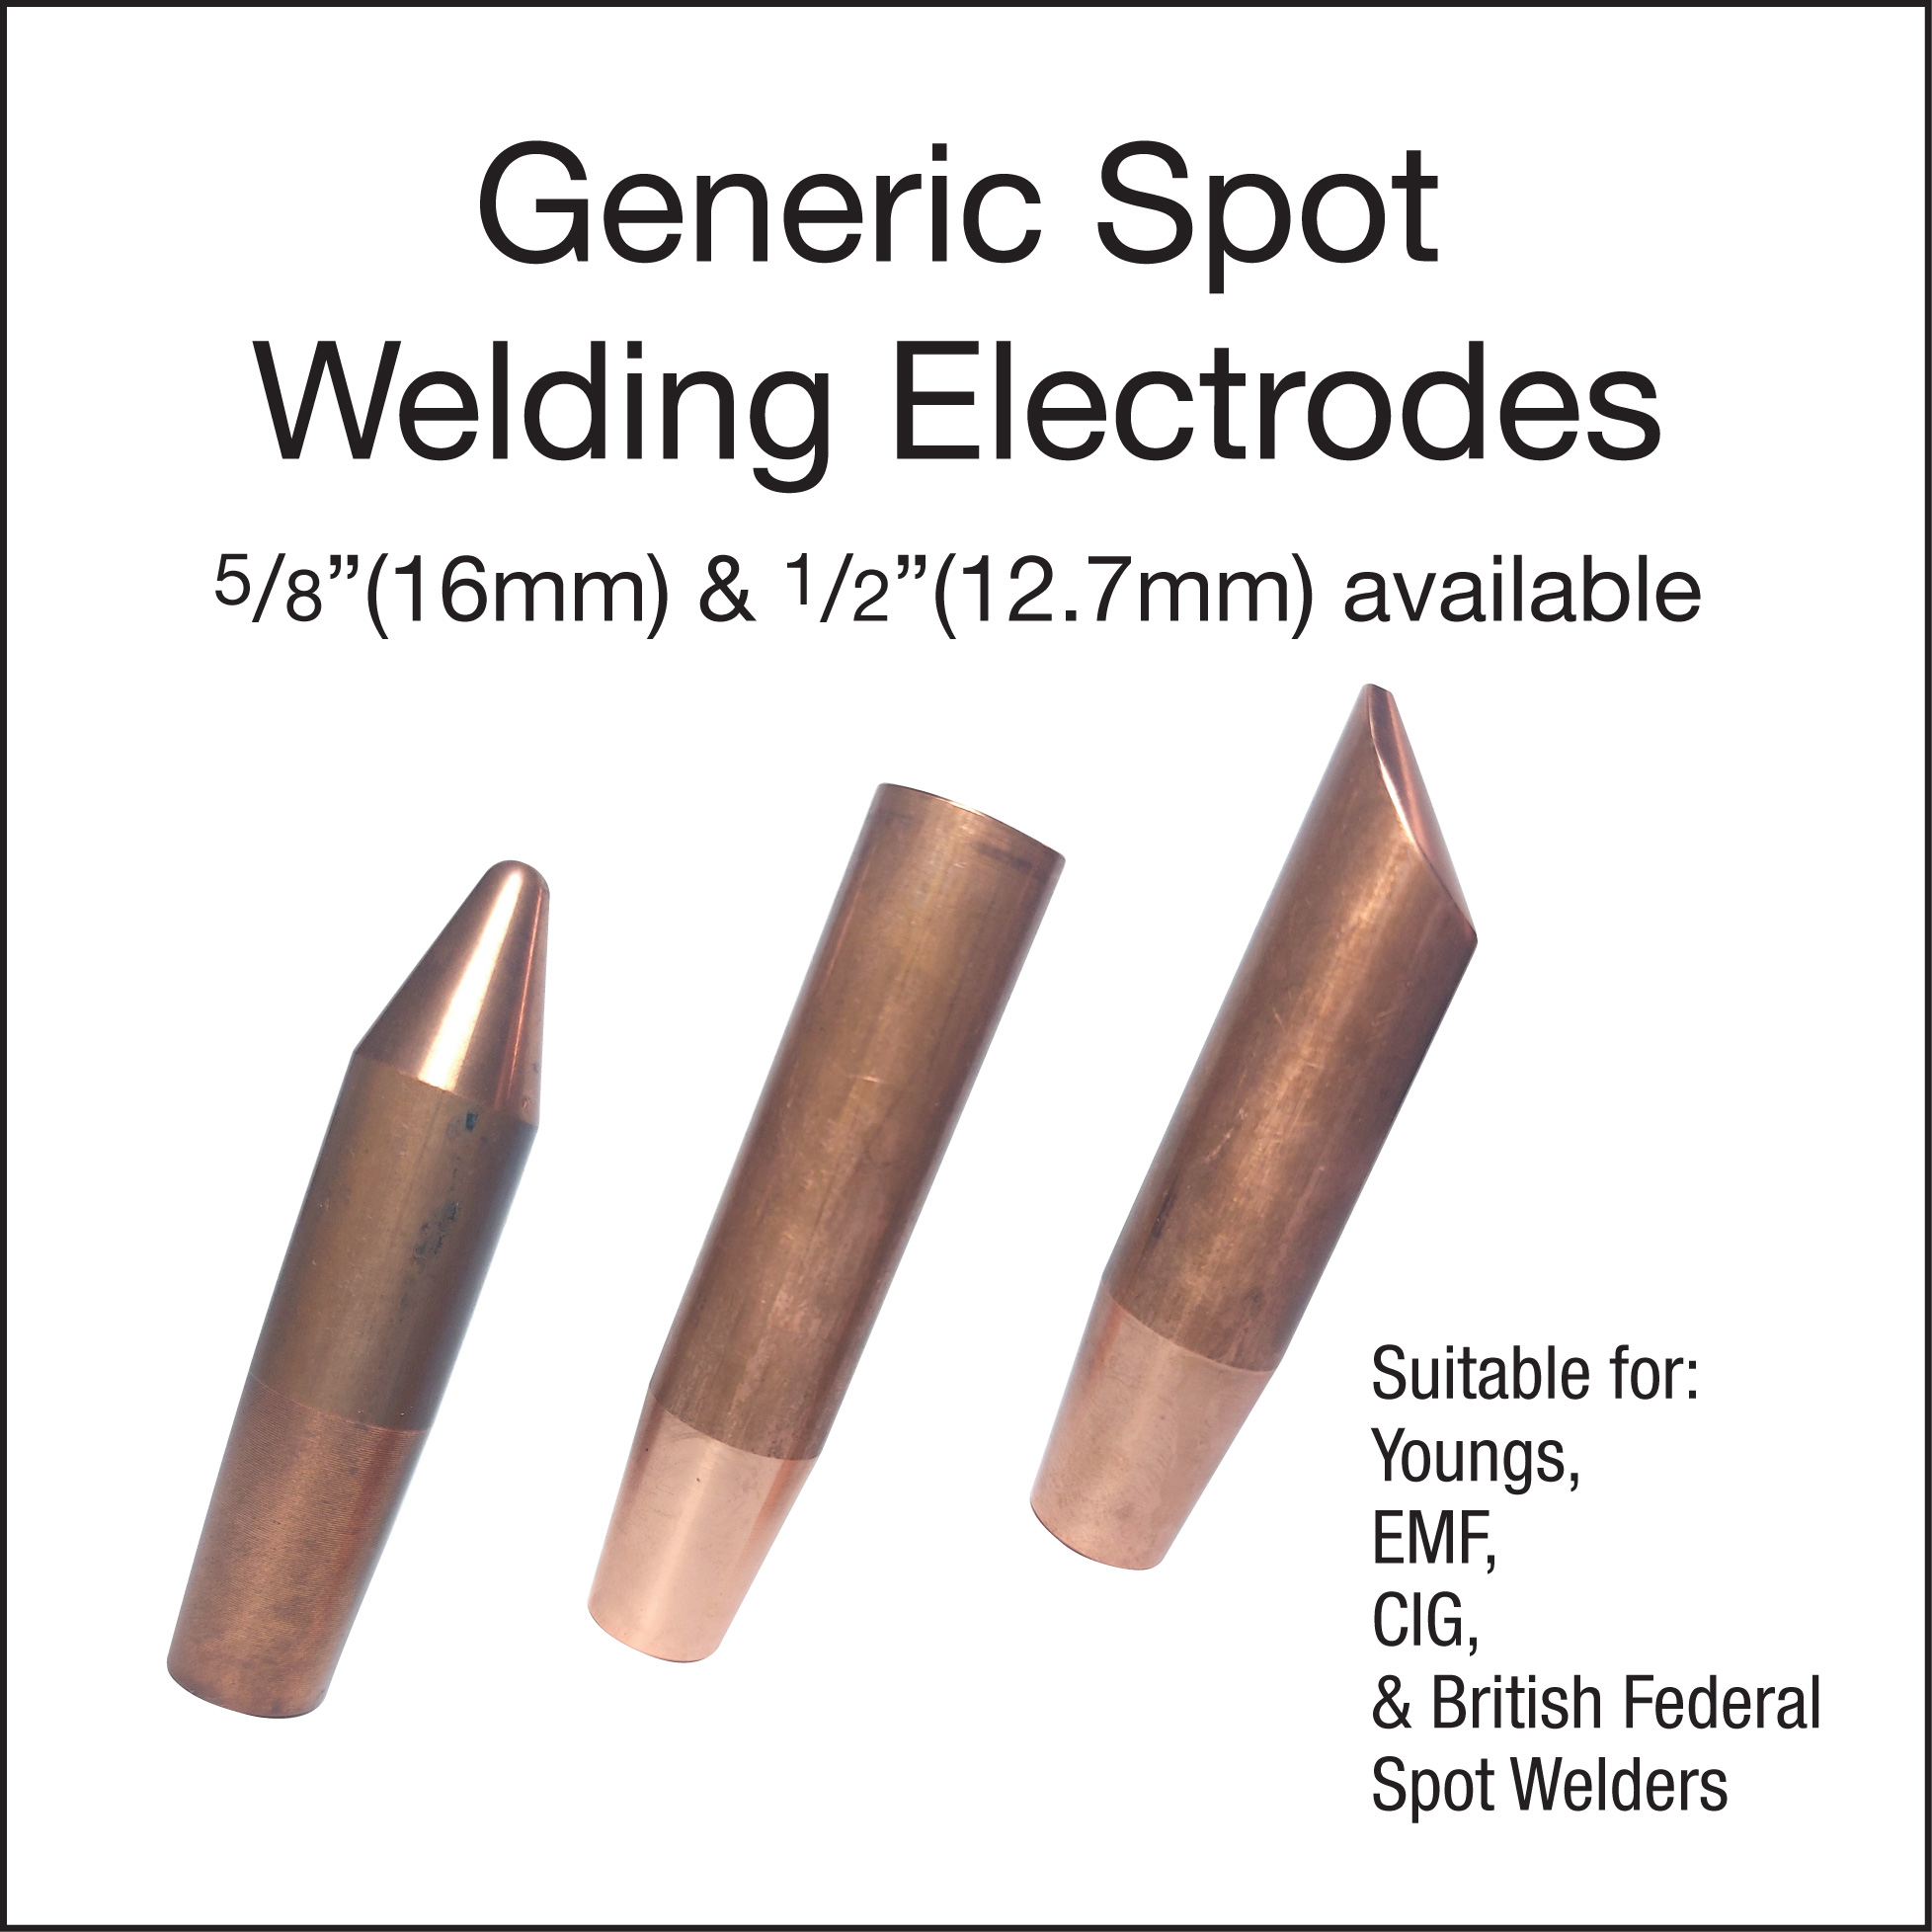 Generic spot welding electrodes suitable for Youngs, EMF, CIG, British Federal, spot welders